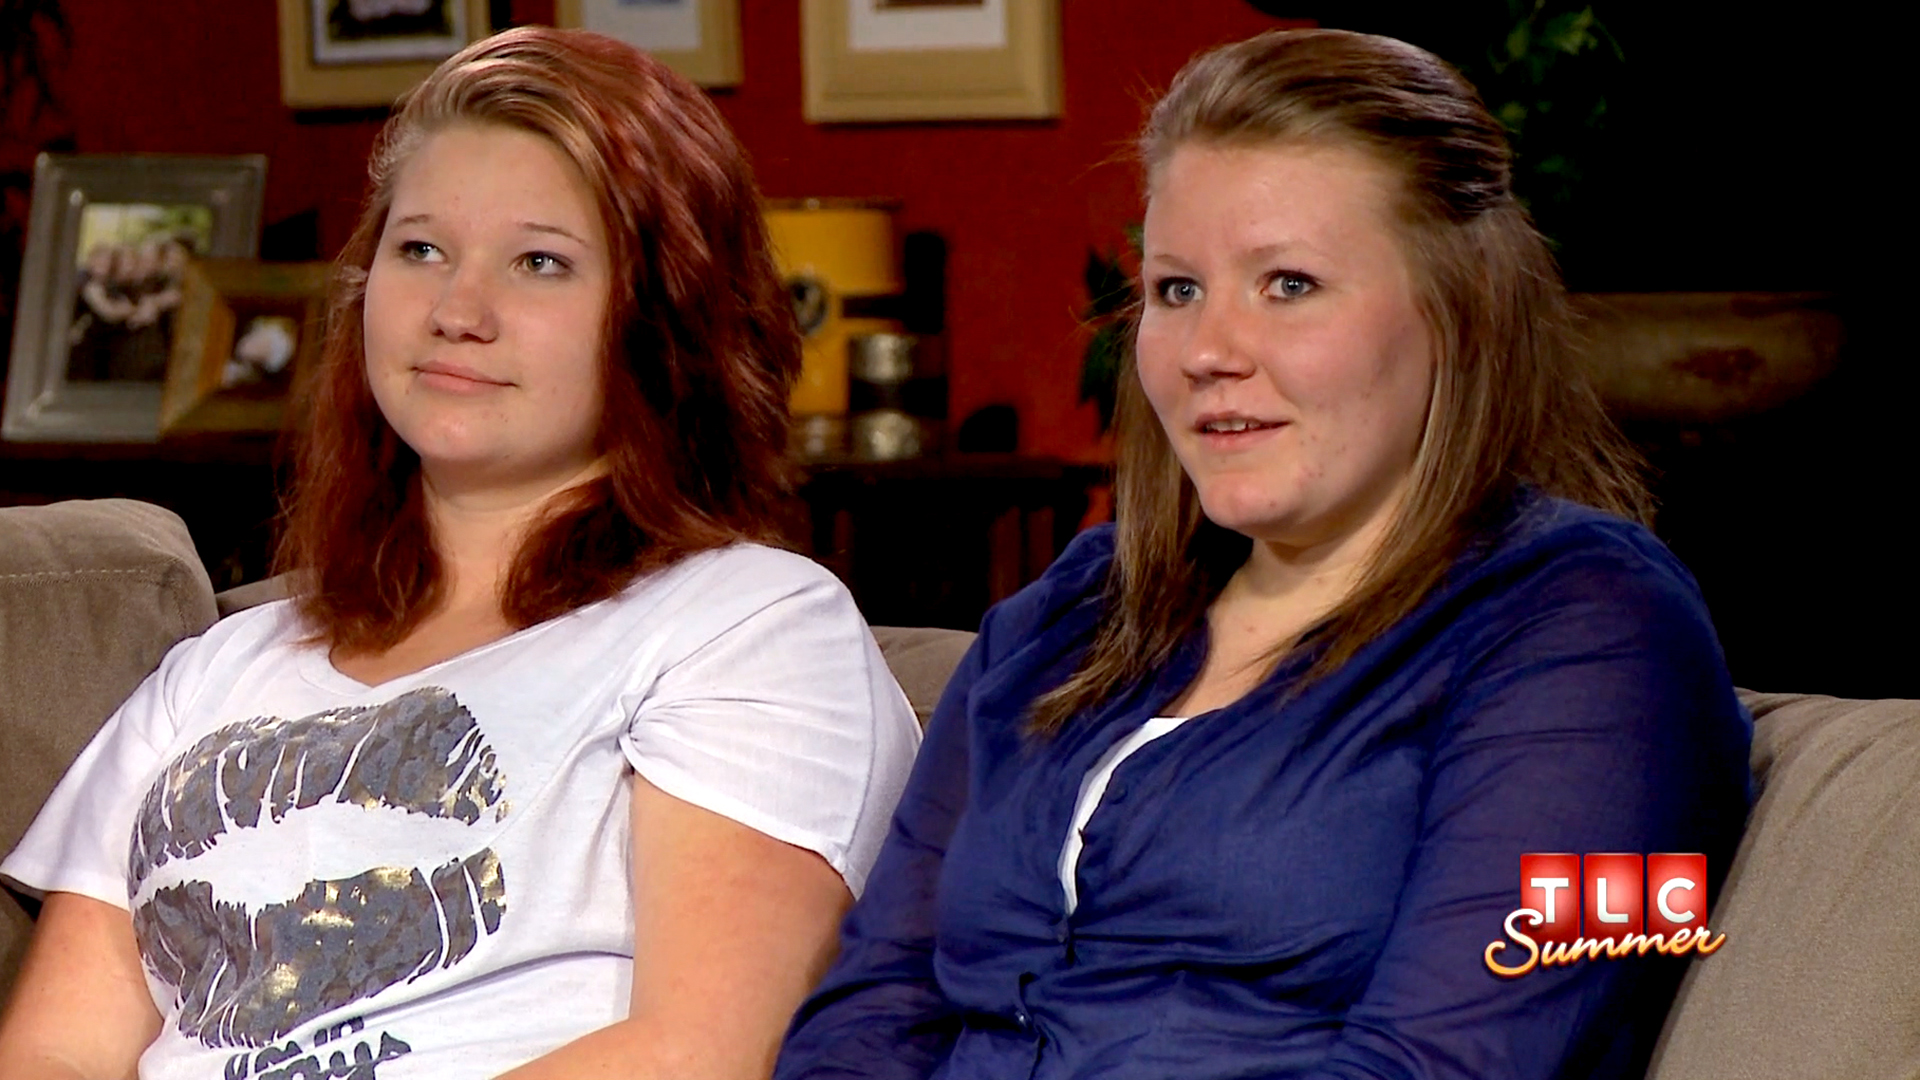 Sister Wives' daughter wants a plural marriage